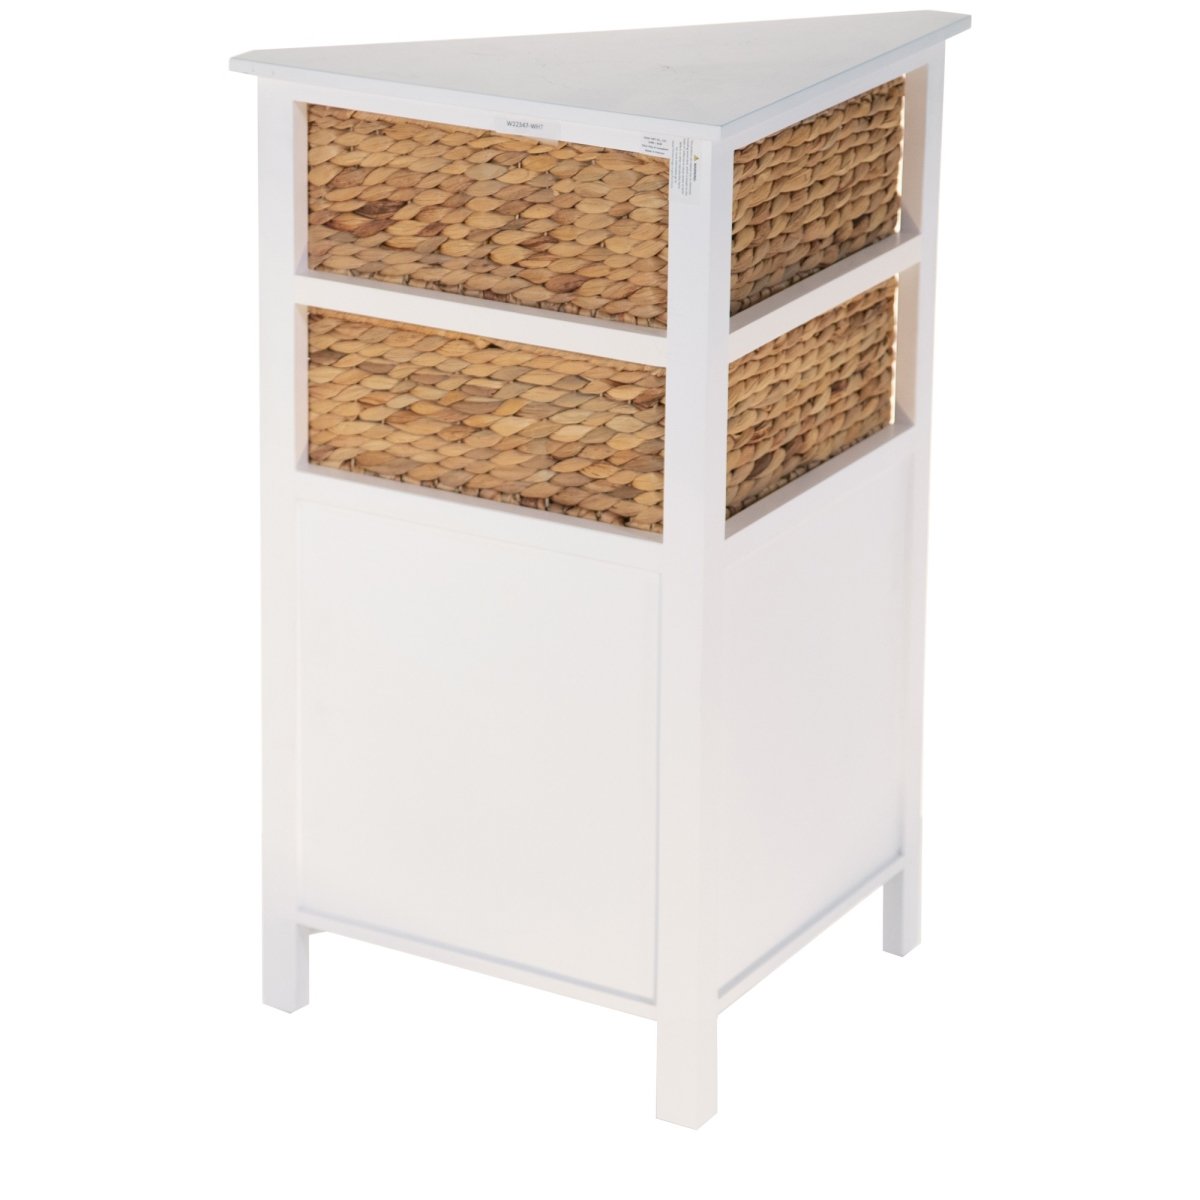 Home Roots 383045 White Wooden Corner Cabinet With 2 Basket Weave Drawers & 2 Door Bottom Storages